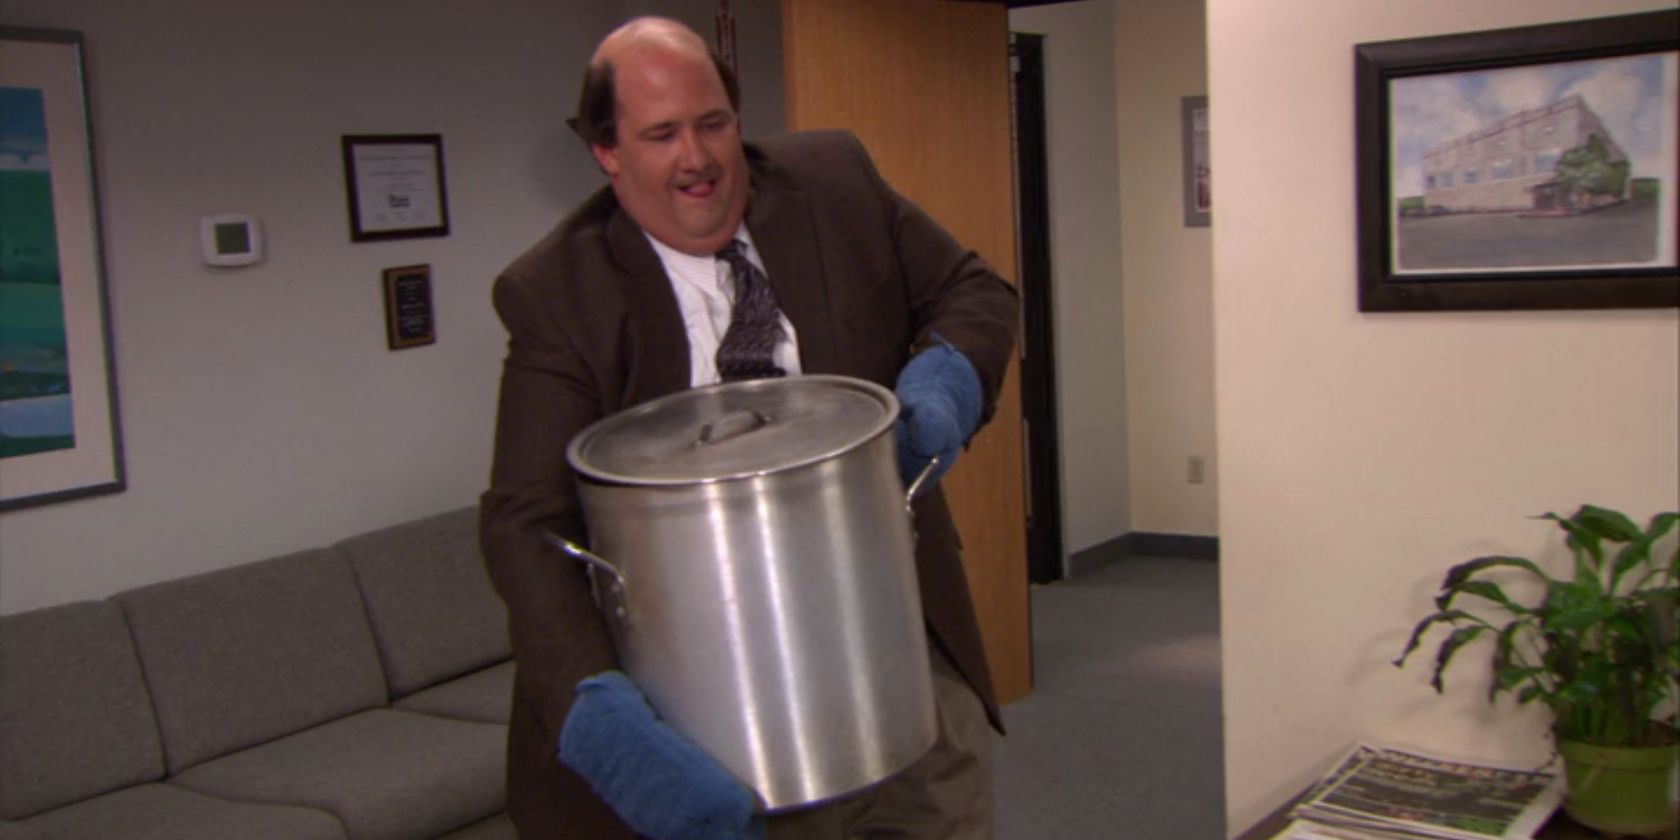 Kevin carries chili into the office in The Office